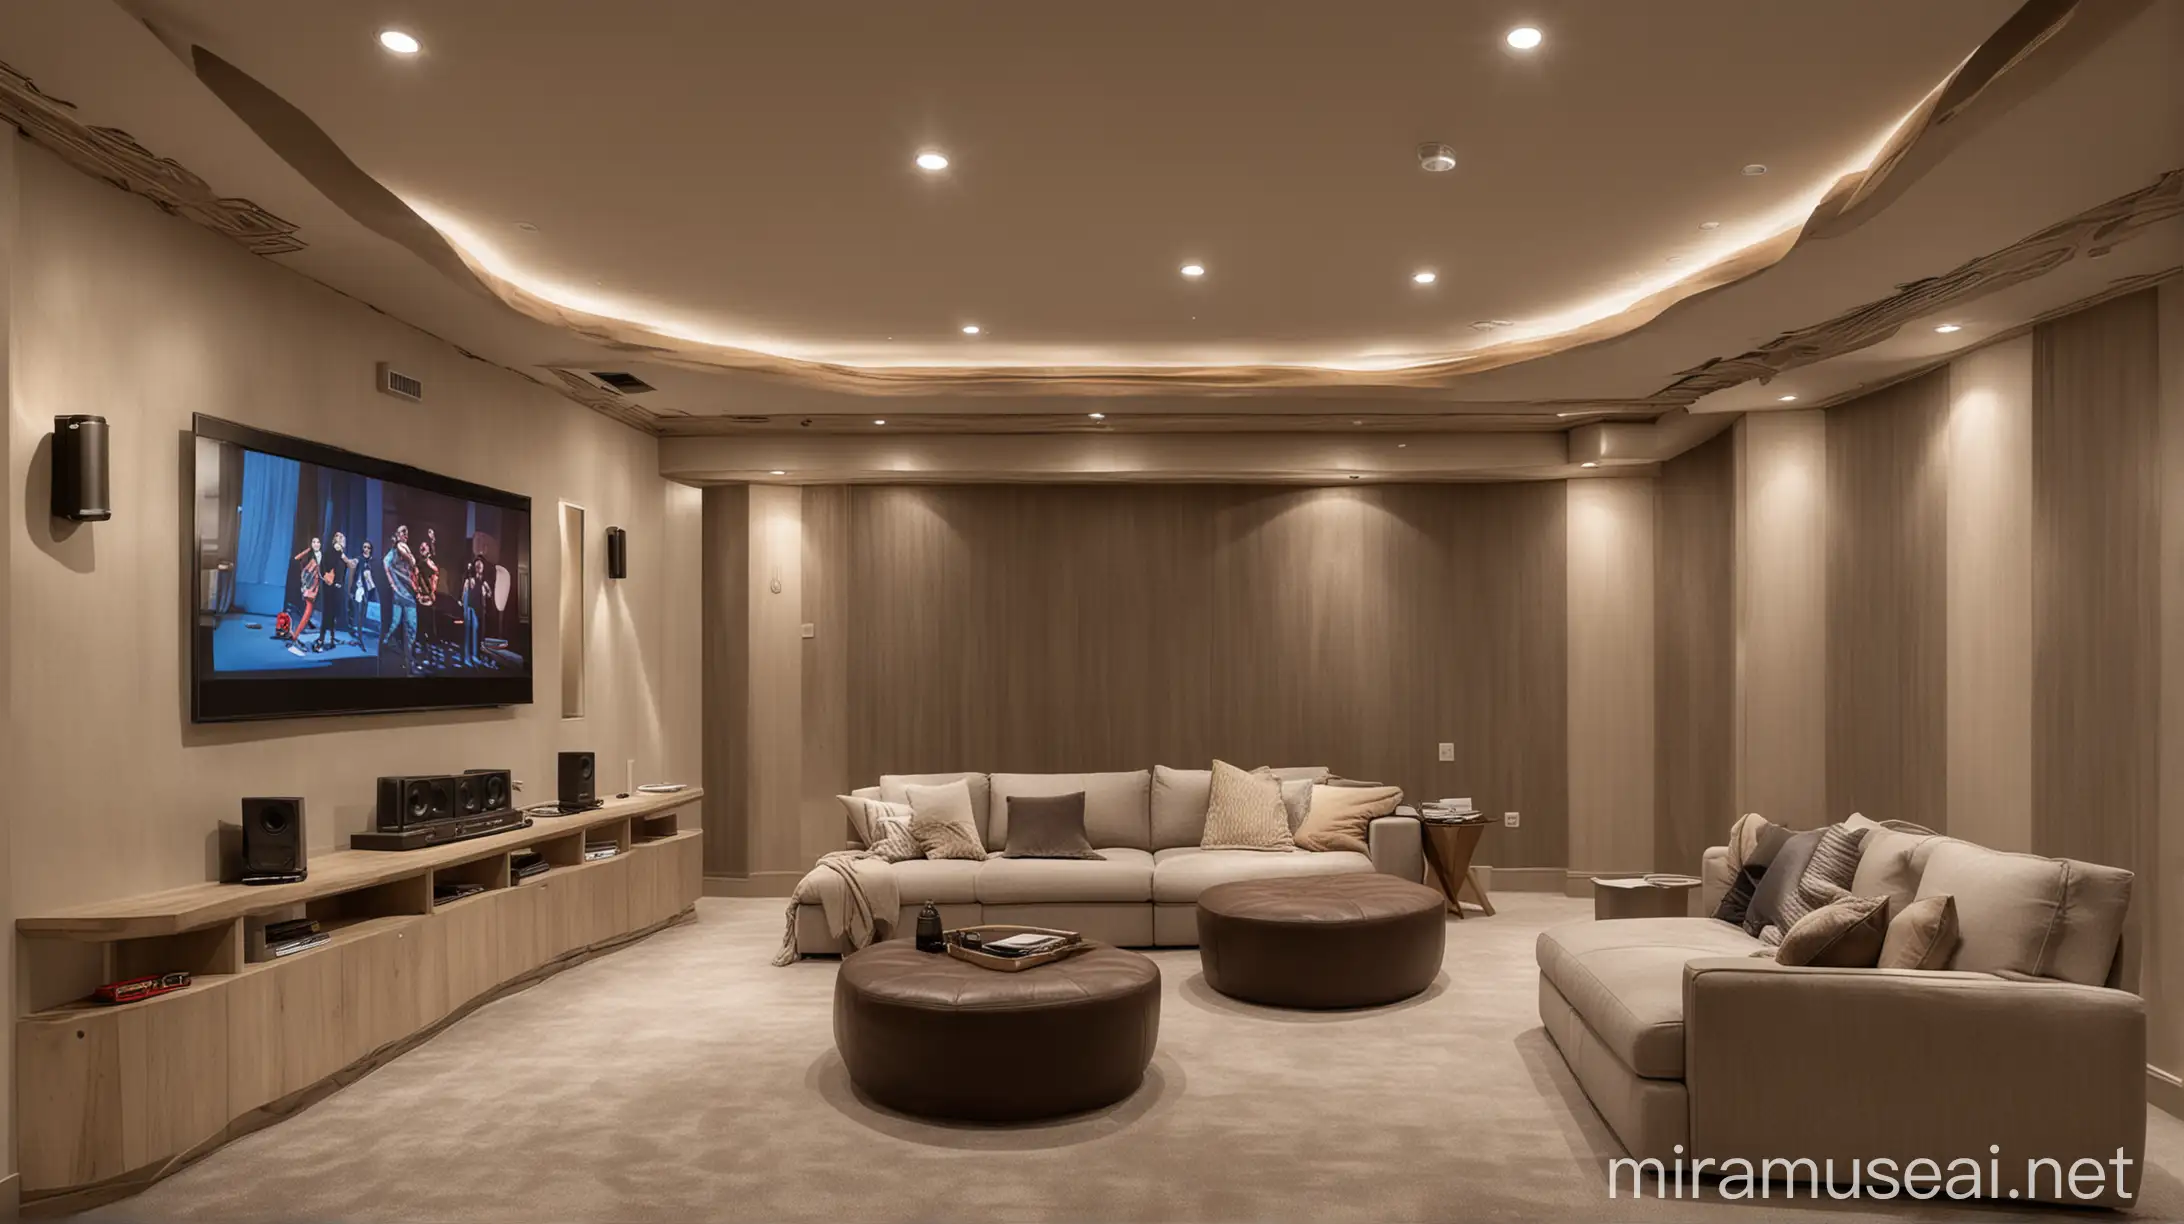 A room that functions as both a home theater and a family room with flexible seating and a hidden screen.